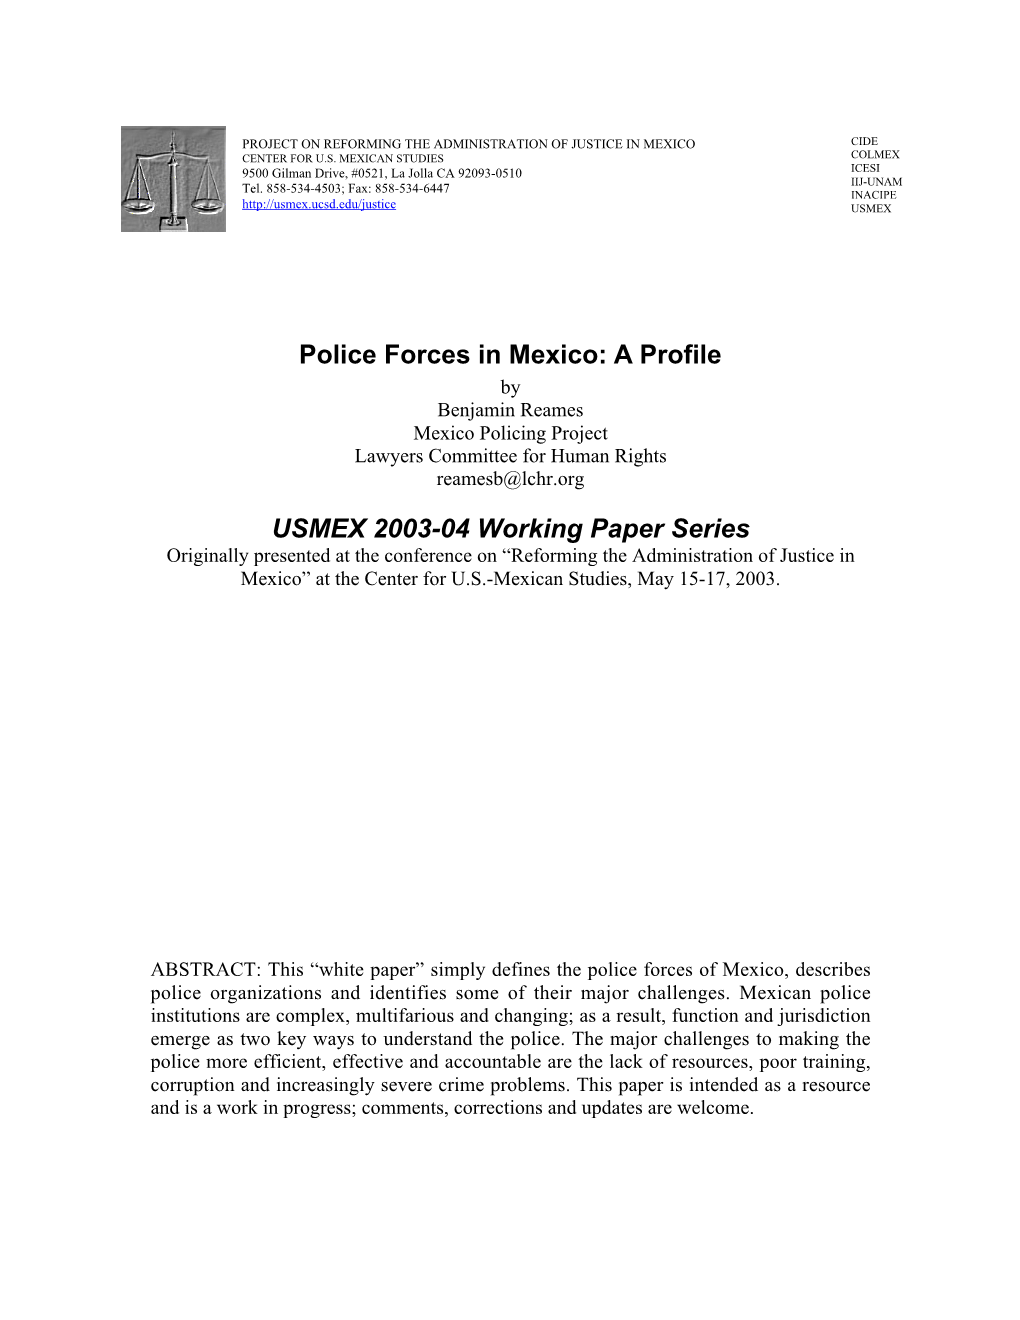 Police Forces in Mexico: a Profile by Benjamin Reames Mexico Policing Project Lawyers Committee for Human Rights Reamesb@Lchr.Org